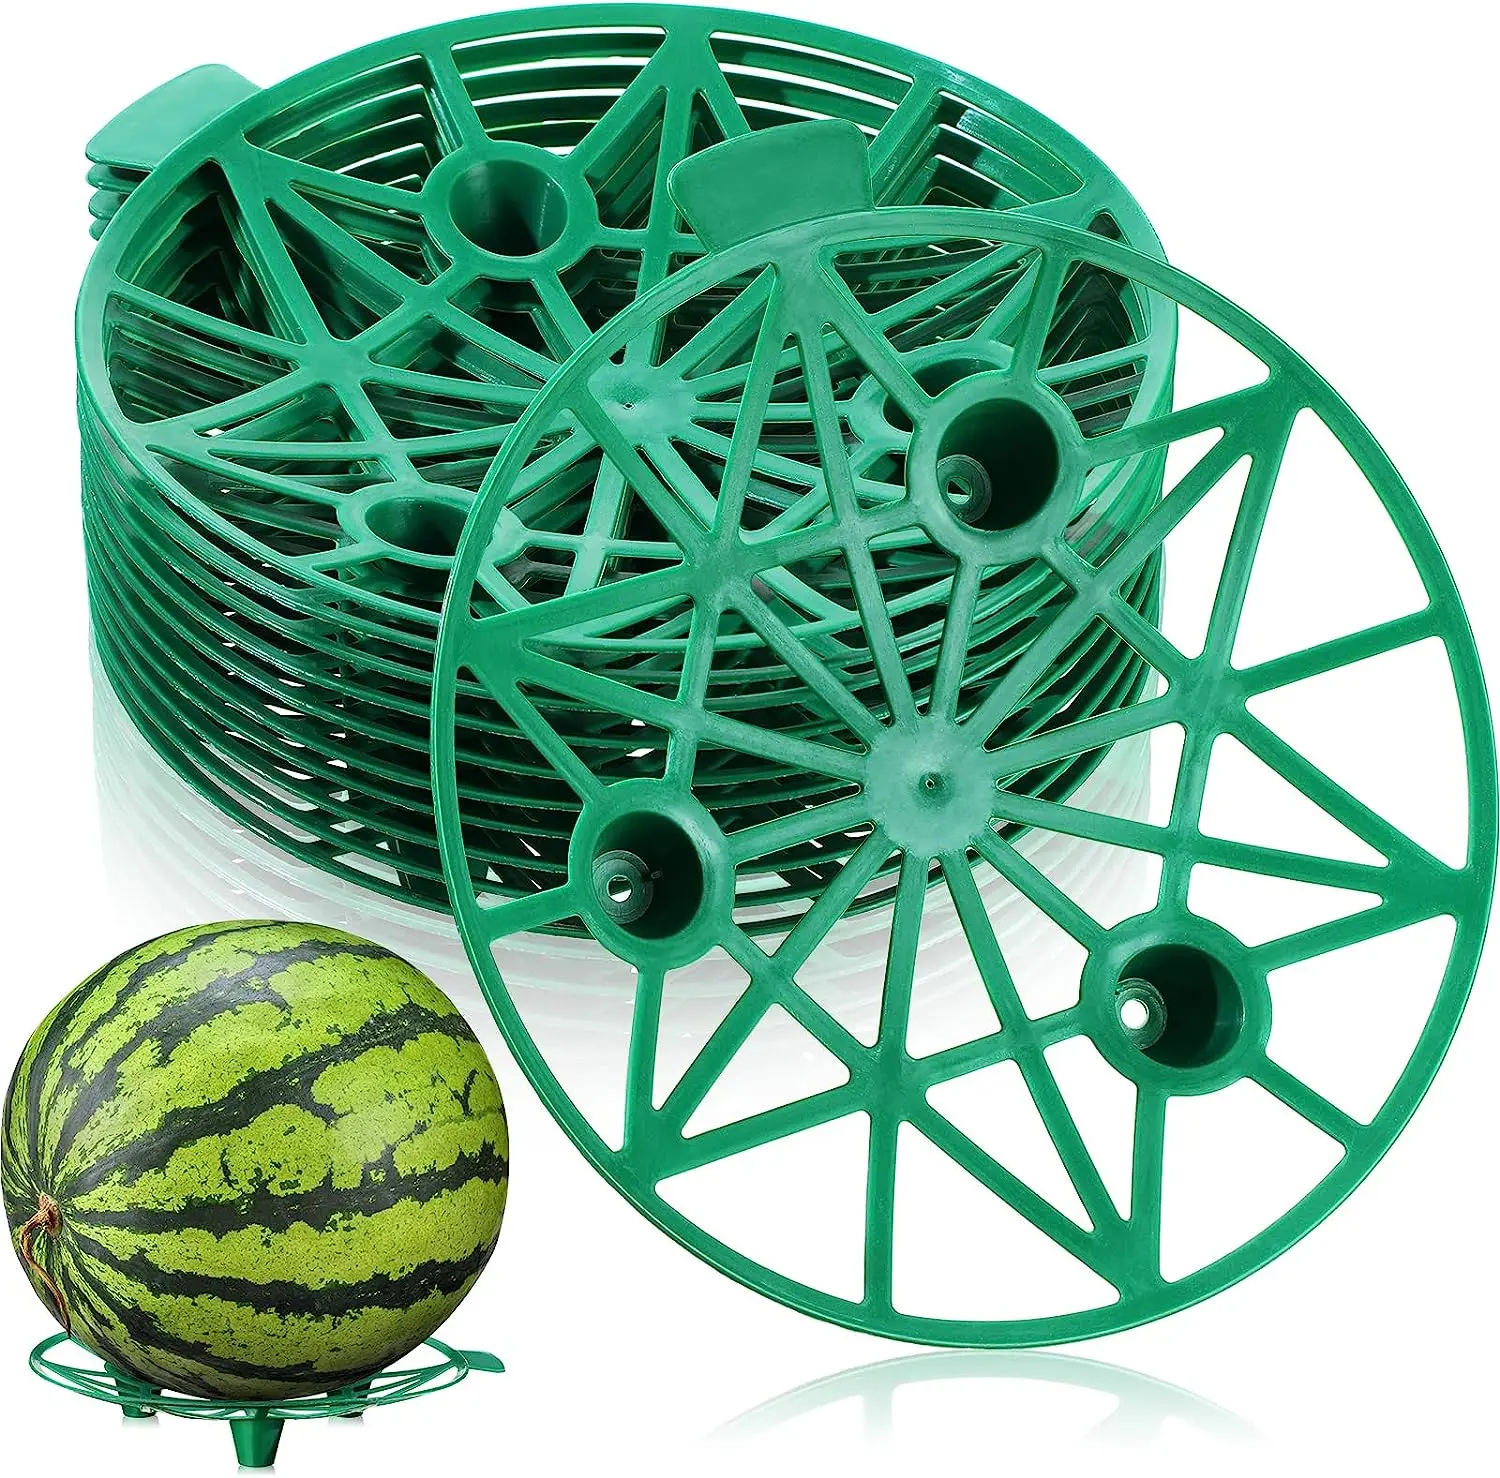 

5/10/20Pcs Strawberry Supports Holder Set Protect Watermelons From Ground Rot Holds Up to 8 lbs Melon Cradle Pumpkin Support